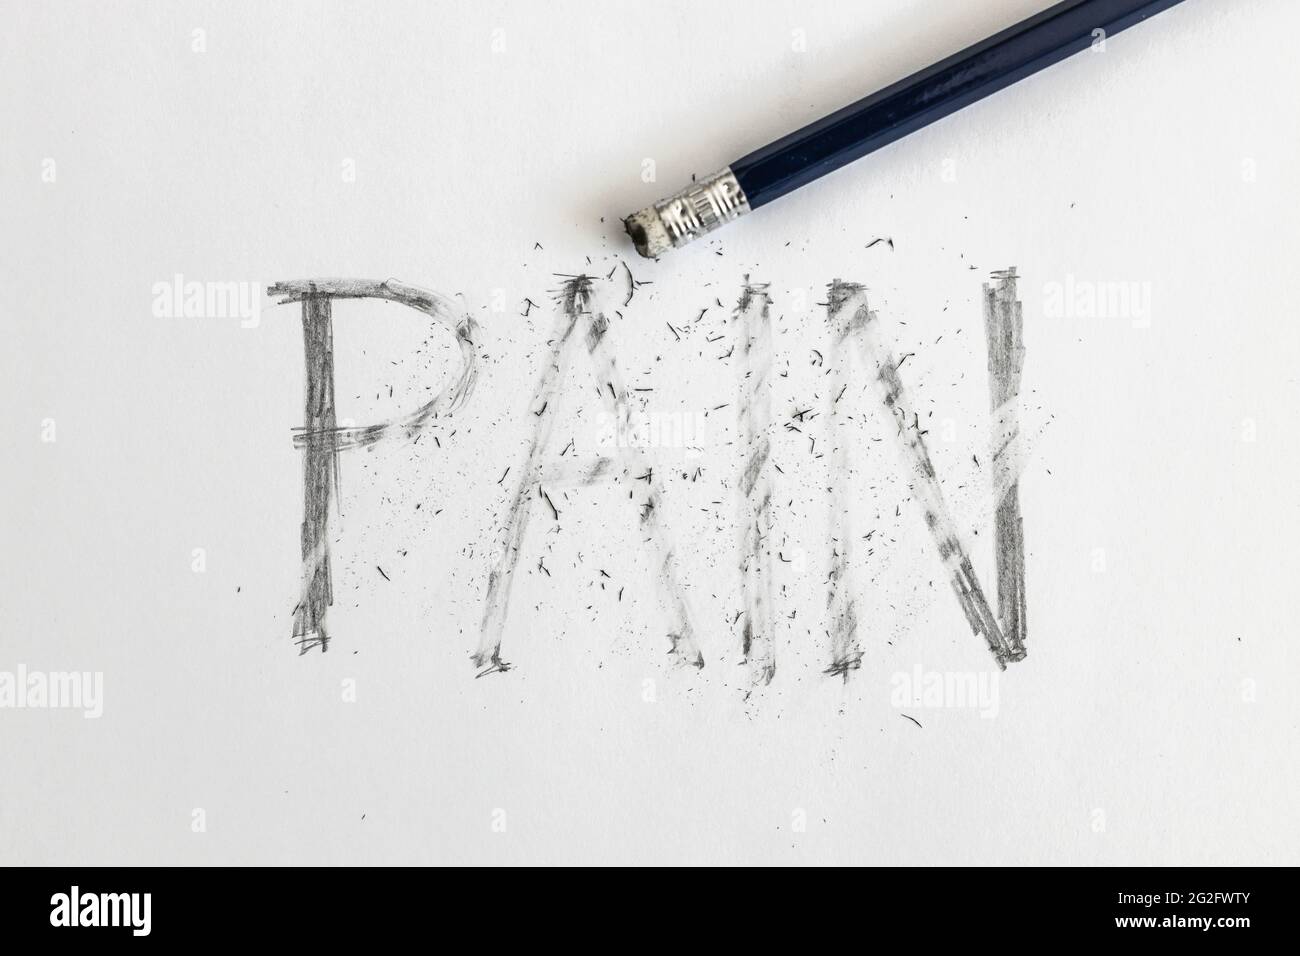 Erasing pain. Pain written on white paper with a pencil, erased with an eraser. Symbolic for overcoming pain or treating pain. Stock Photo